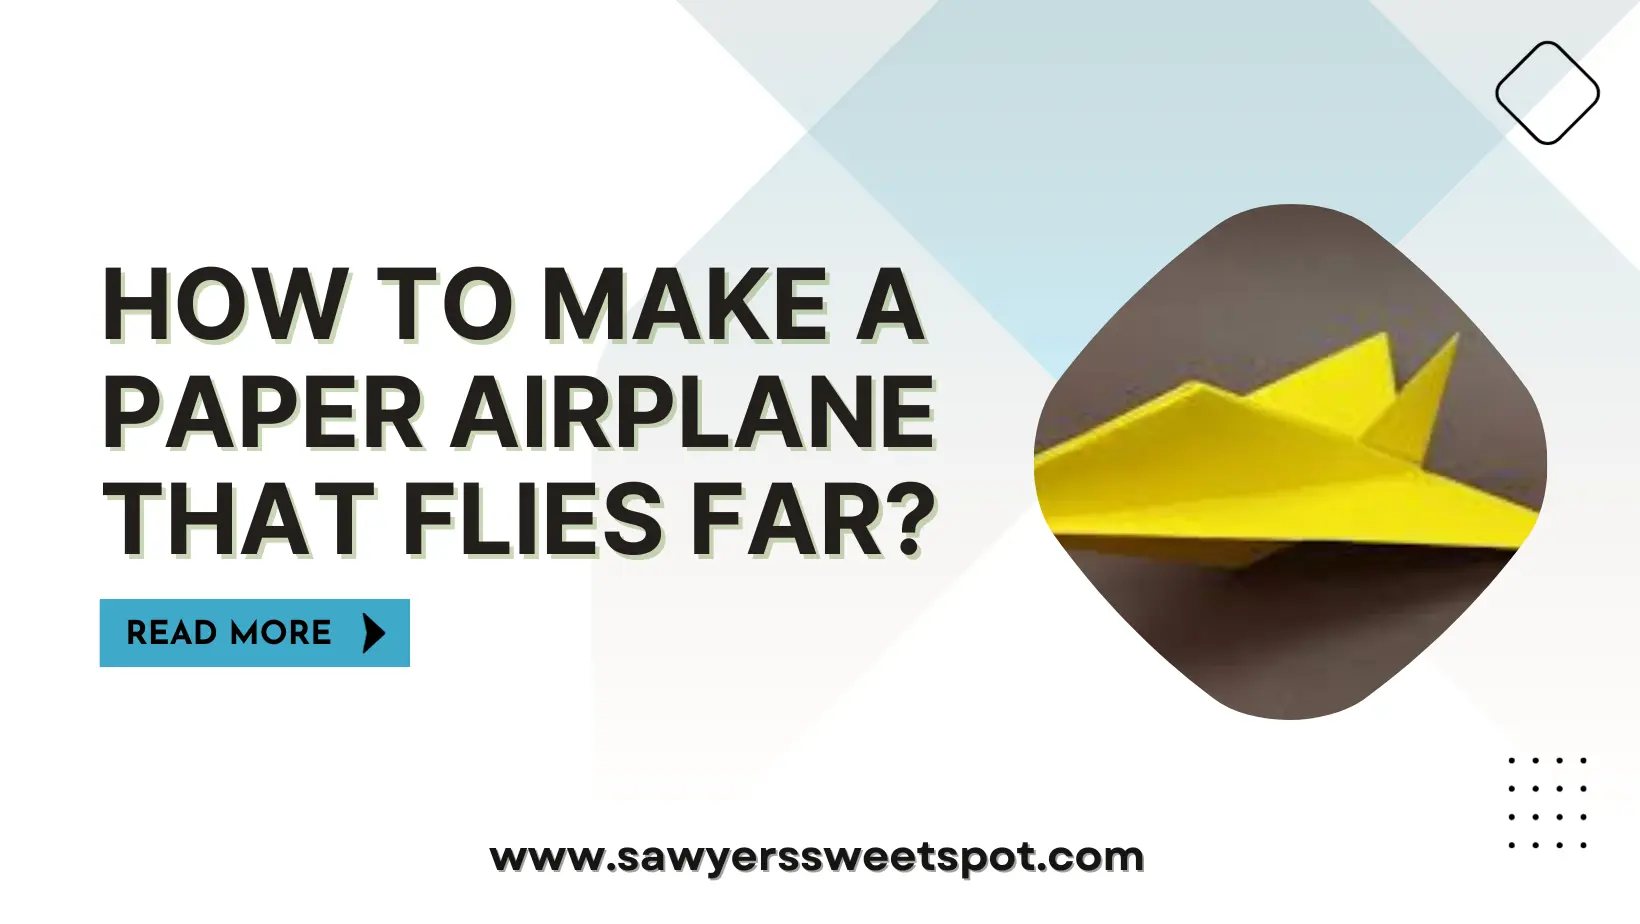 How To Make A Paper Airplane that Flies Far?